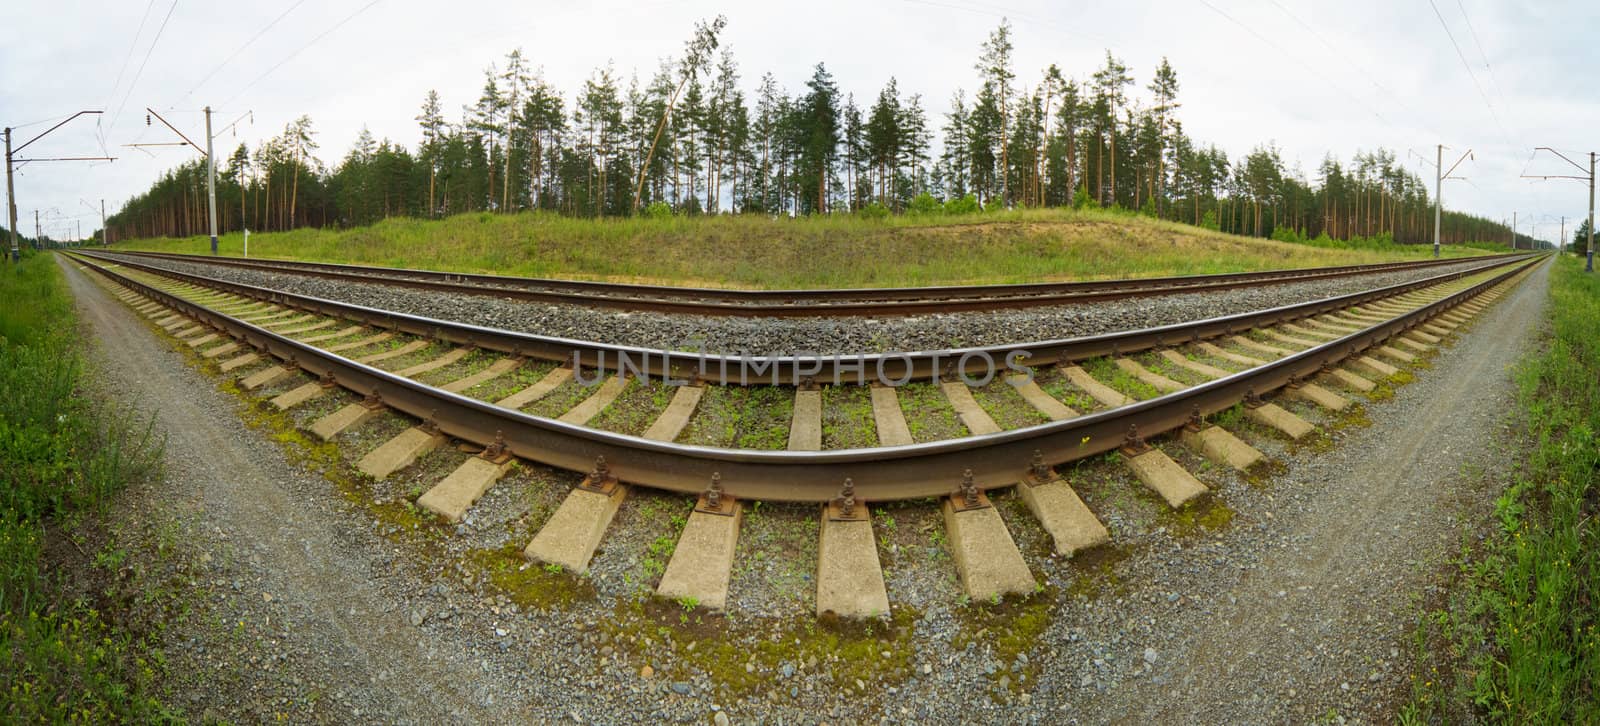 The wide-angle panoramic photo of railroad tracks - 180 degrees